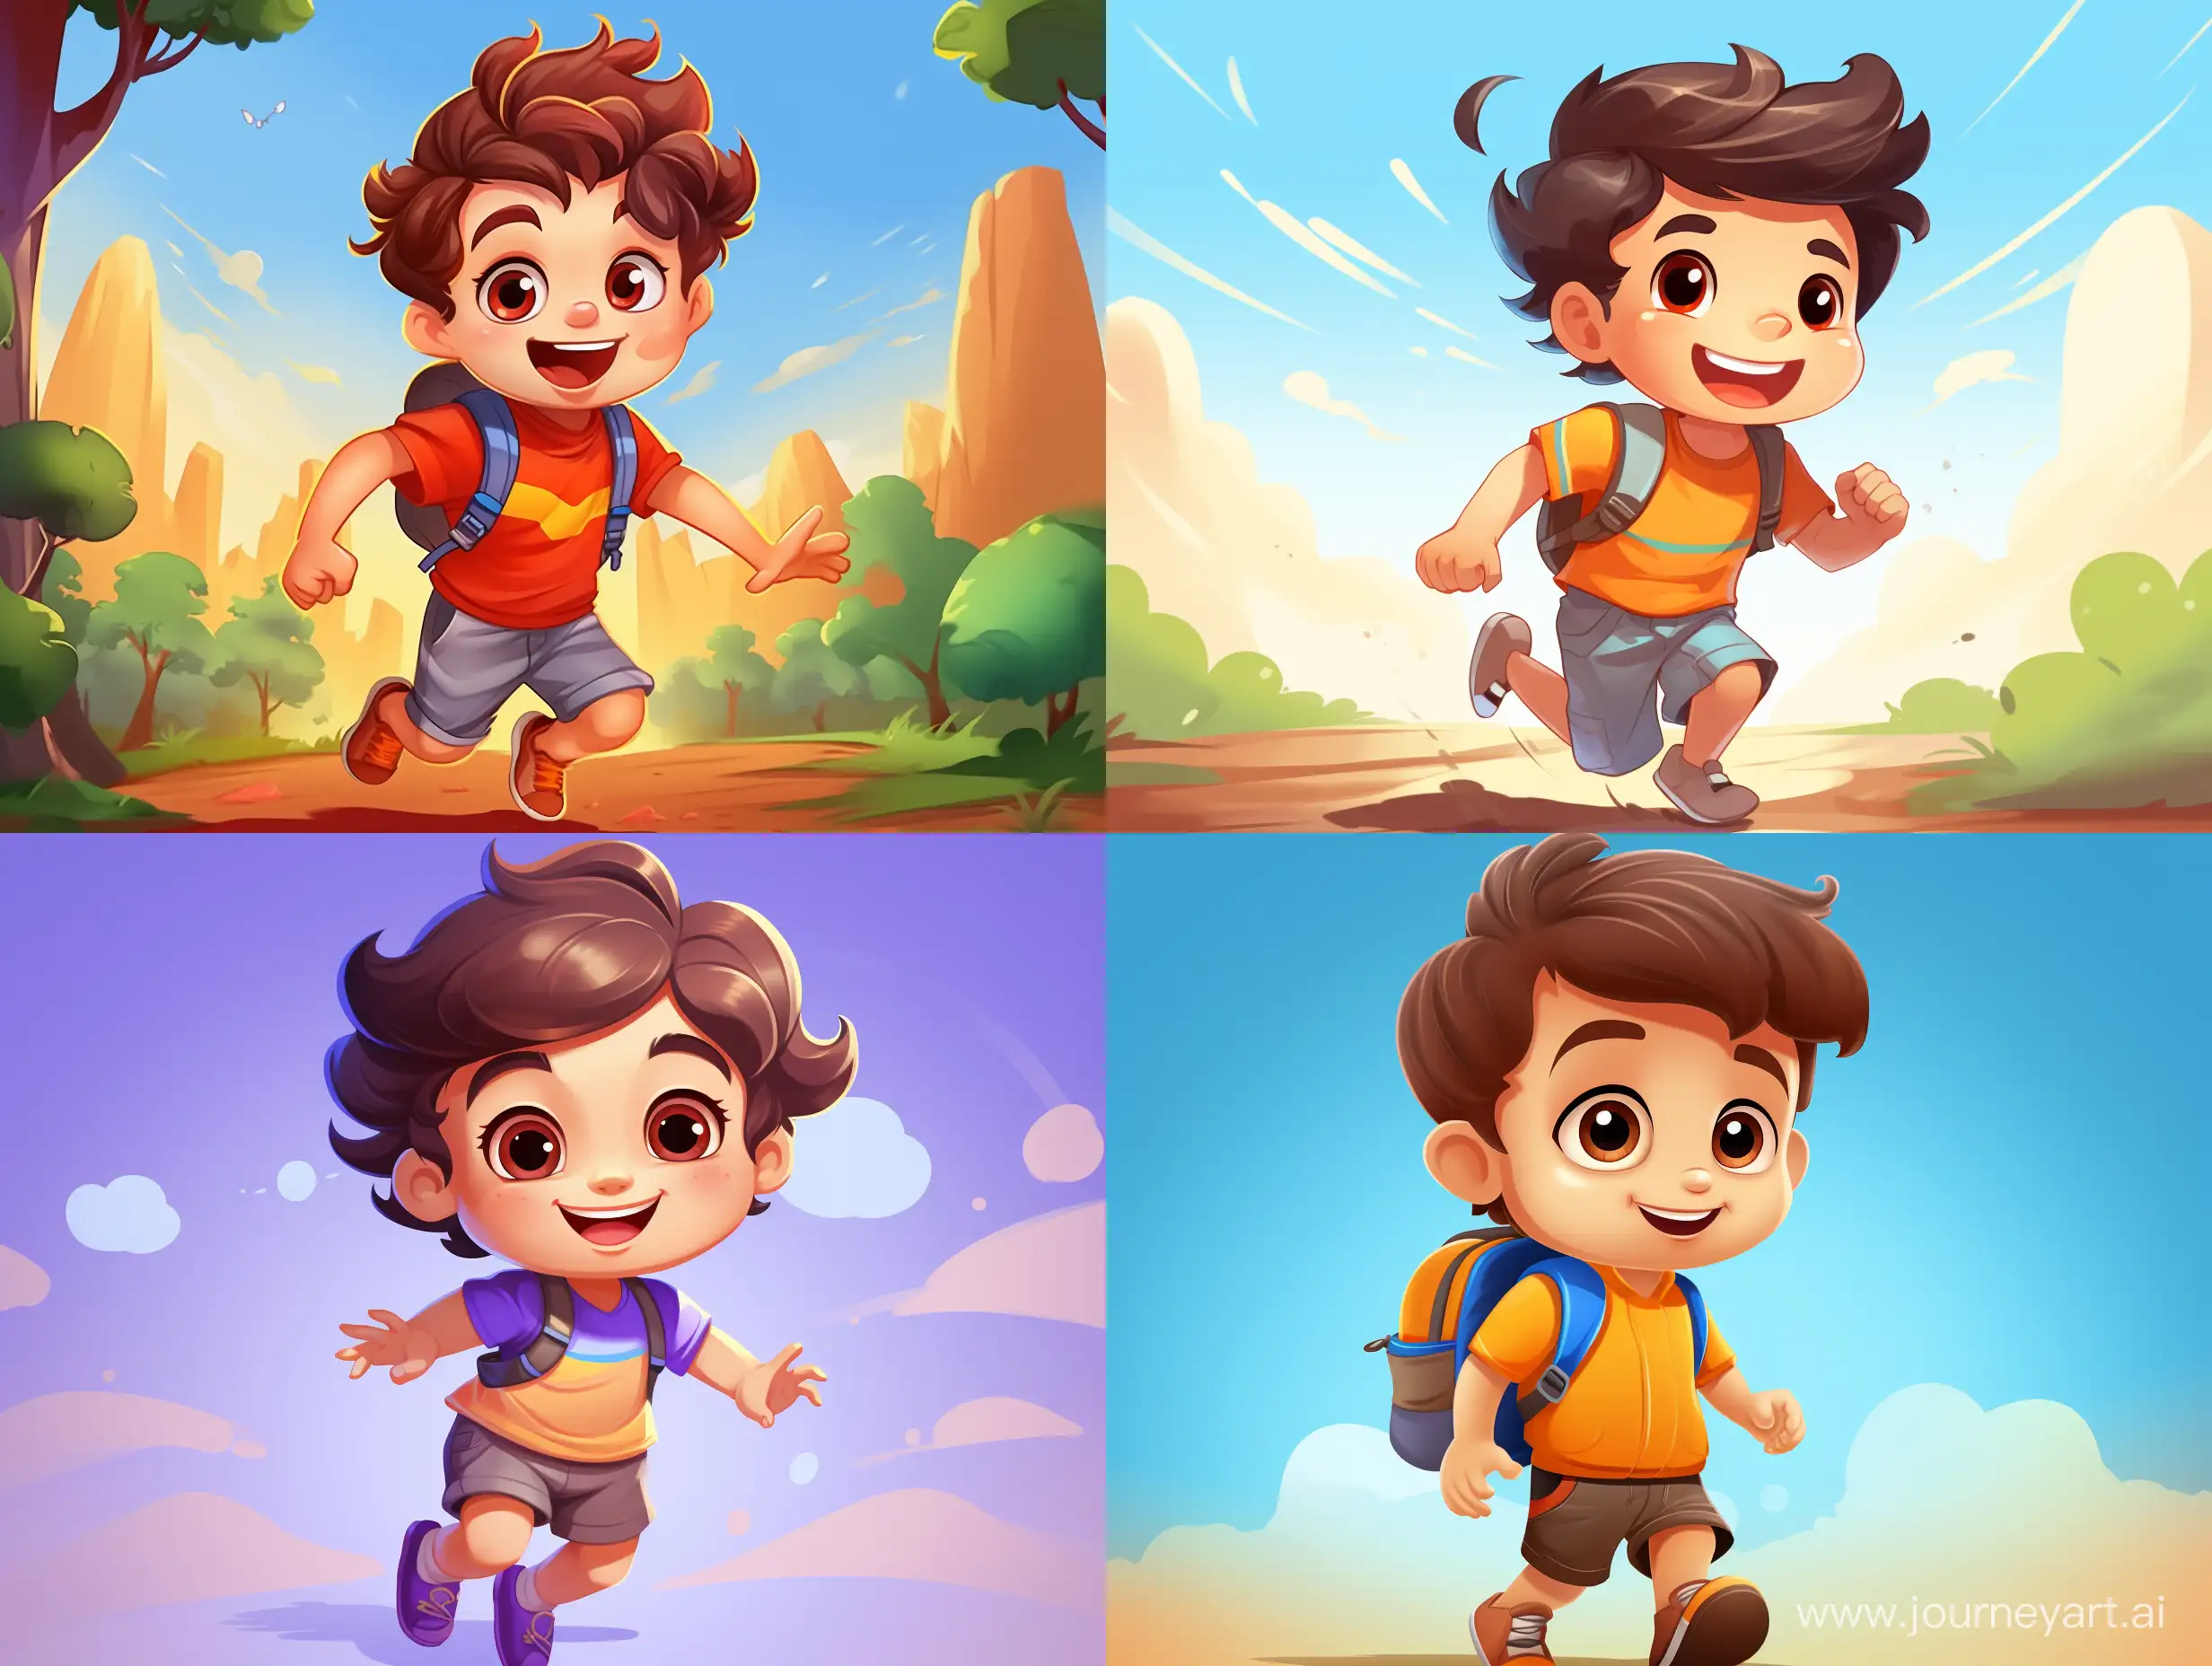 Energetic-2D-Cartoon-of-a-Playful-Little-Boy-in-Vibrant-Colors